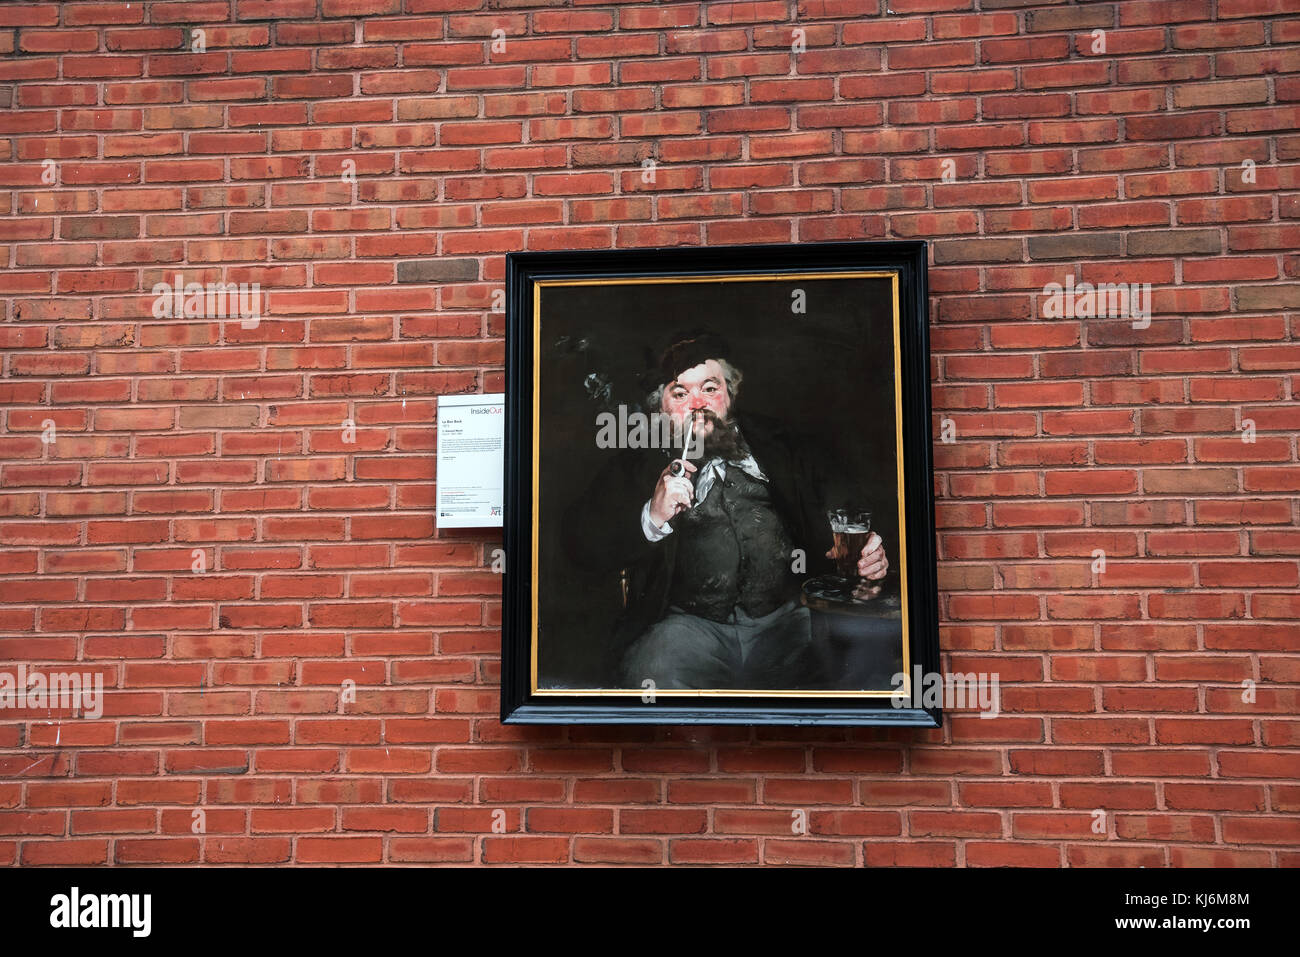 Reproduction of Eduard Monet's painting on the outside wall of the building, Philadelphia, Pennsylvania, USA Stock Photo